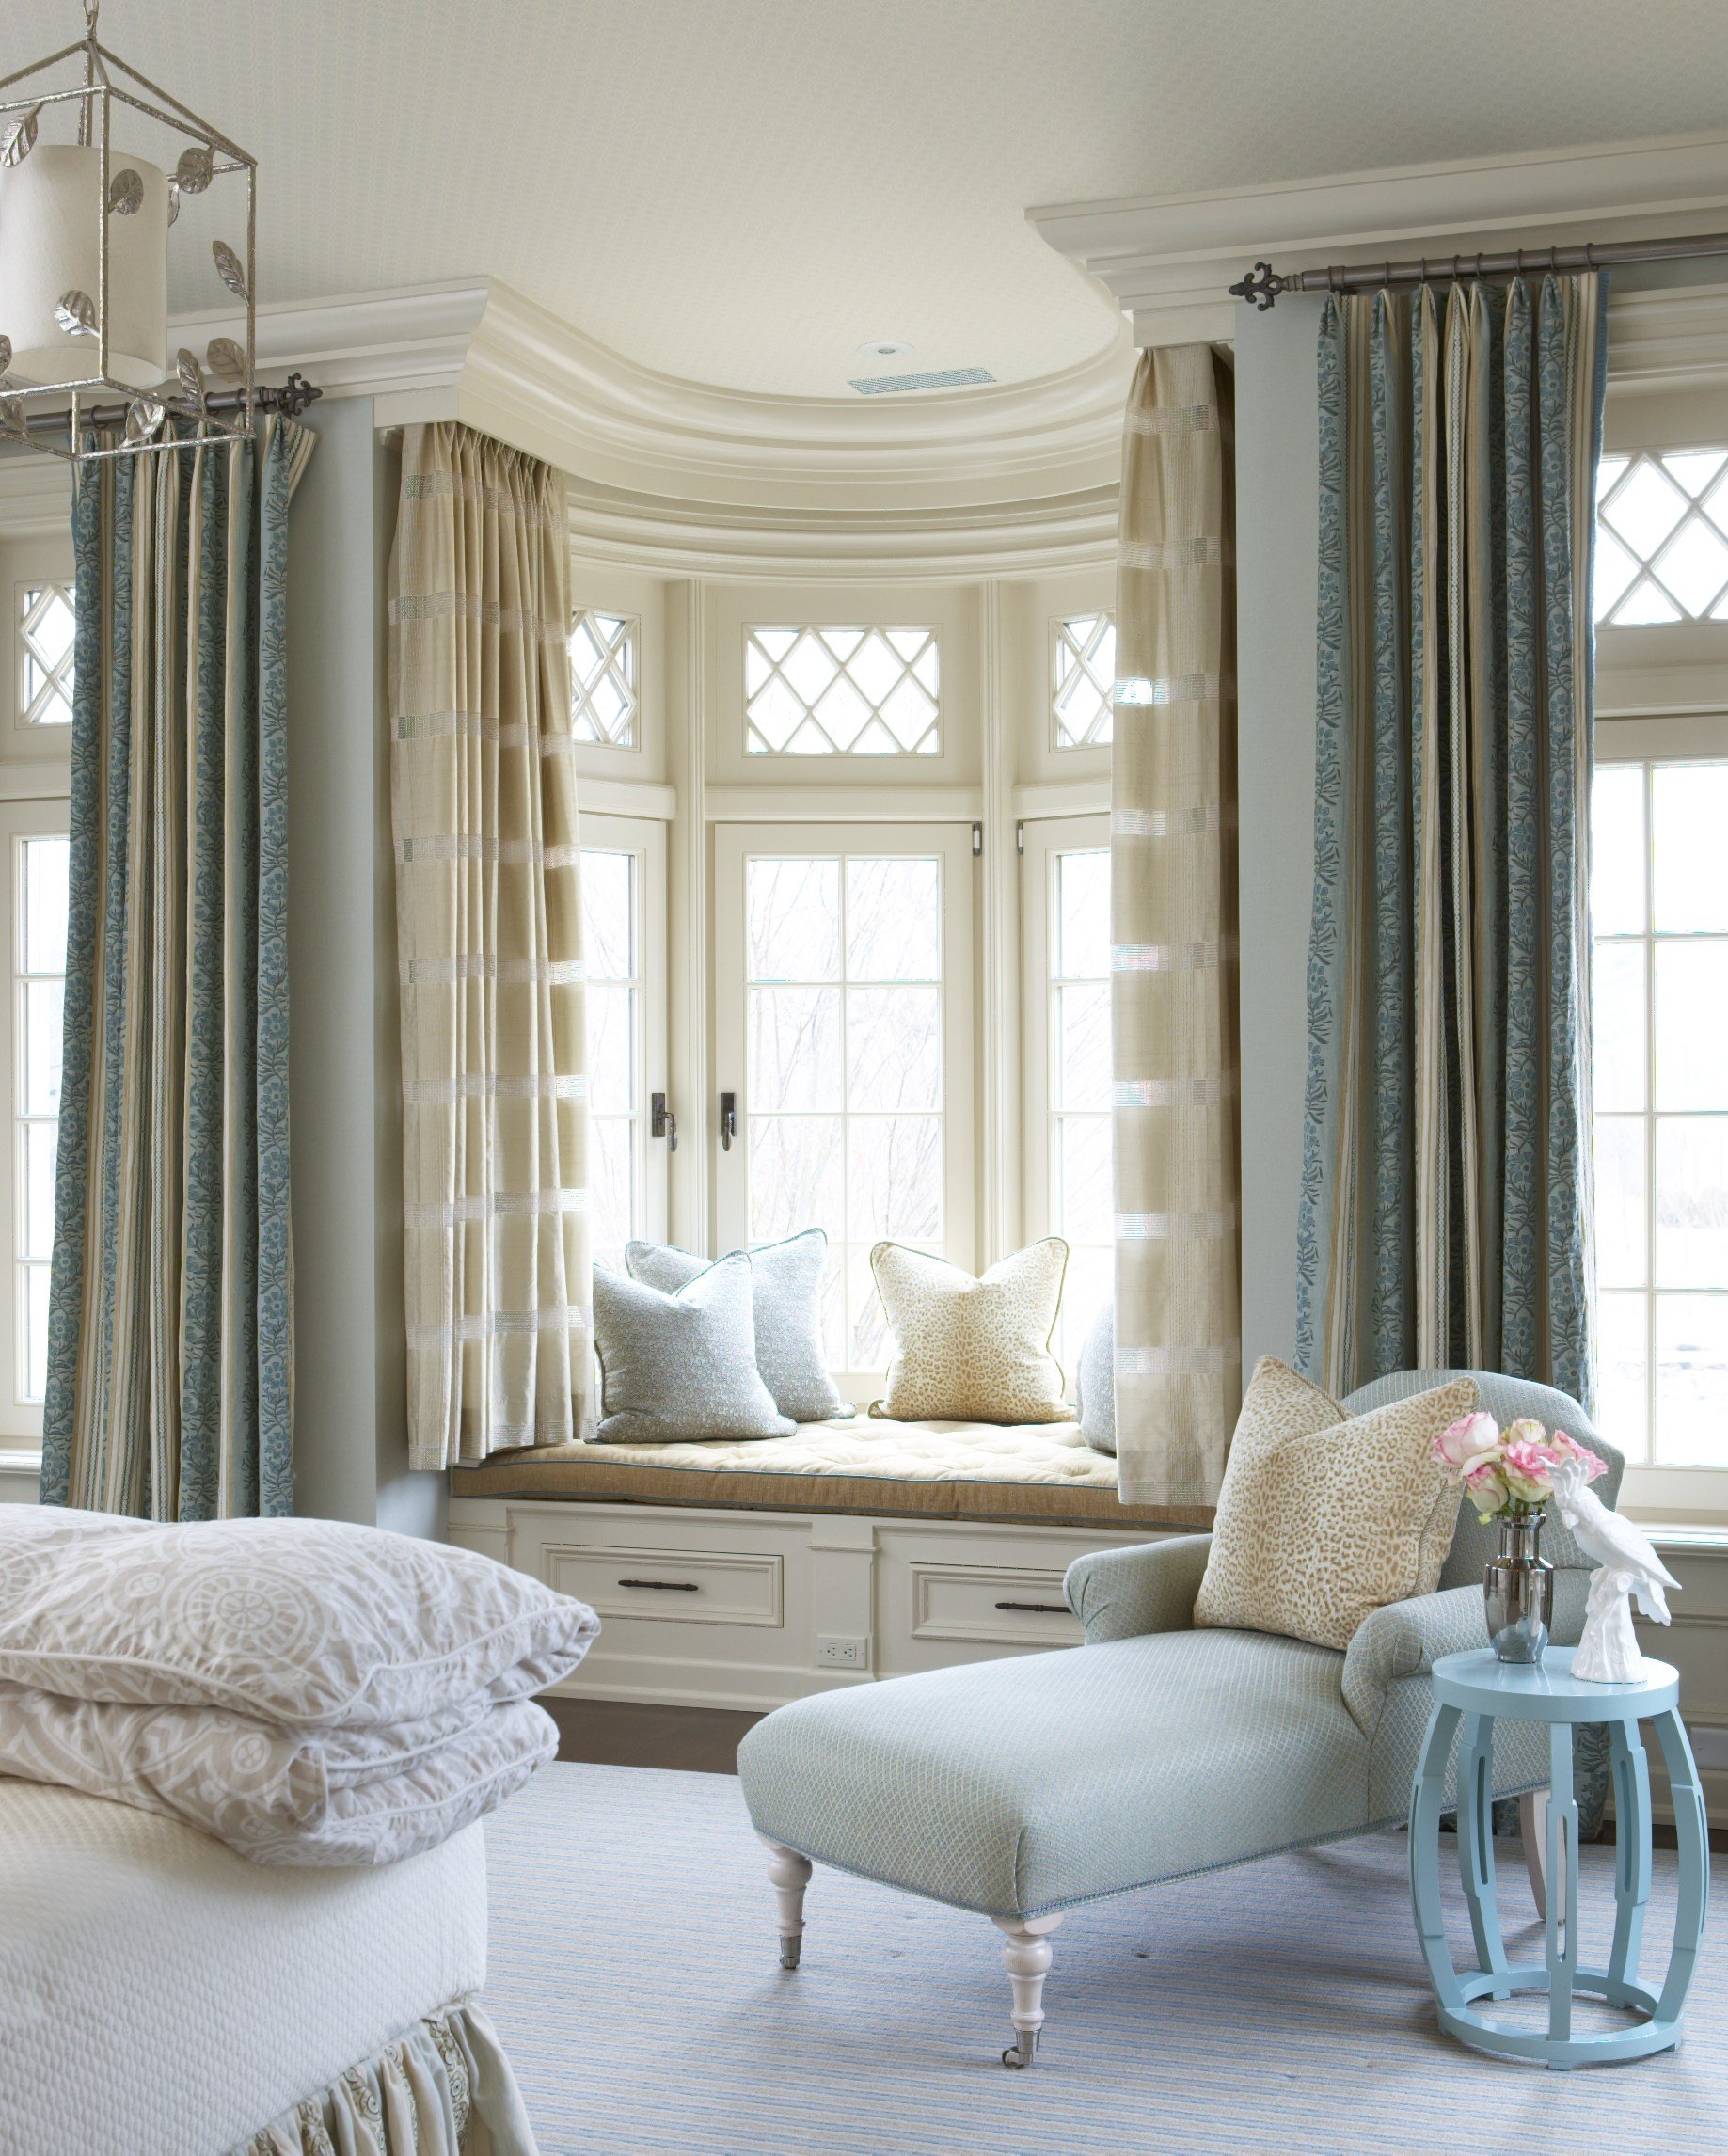 27-natural-reading-nook-blue-accents-cream-colored-wood-tall-window-rinfret-interior-designs.jpg